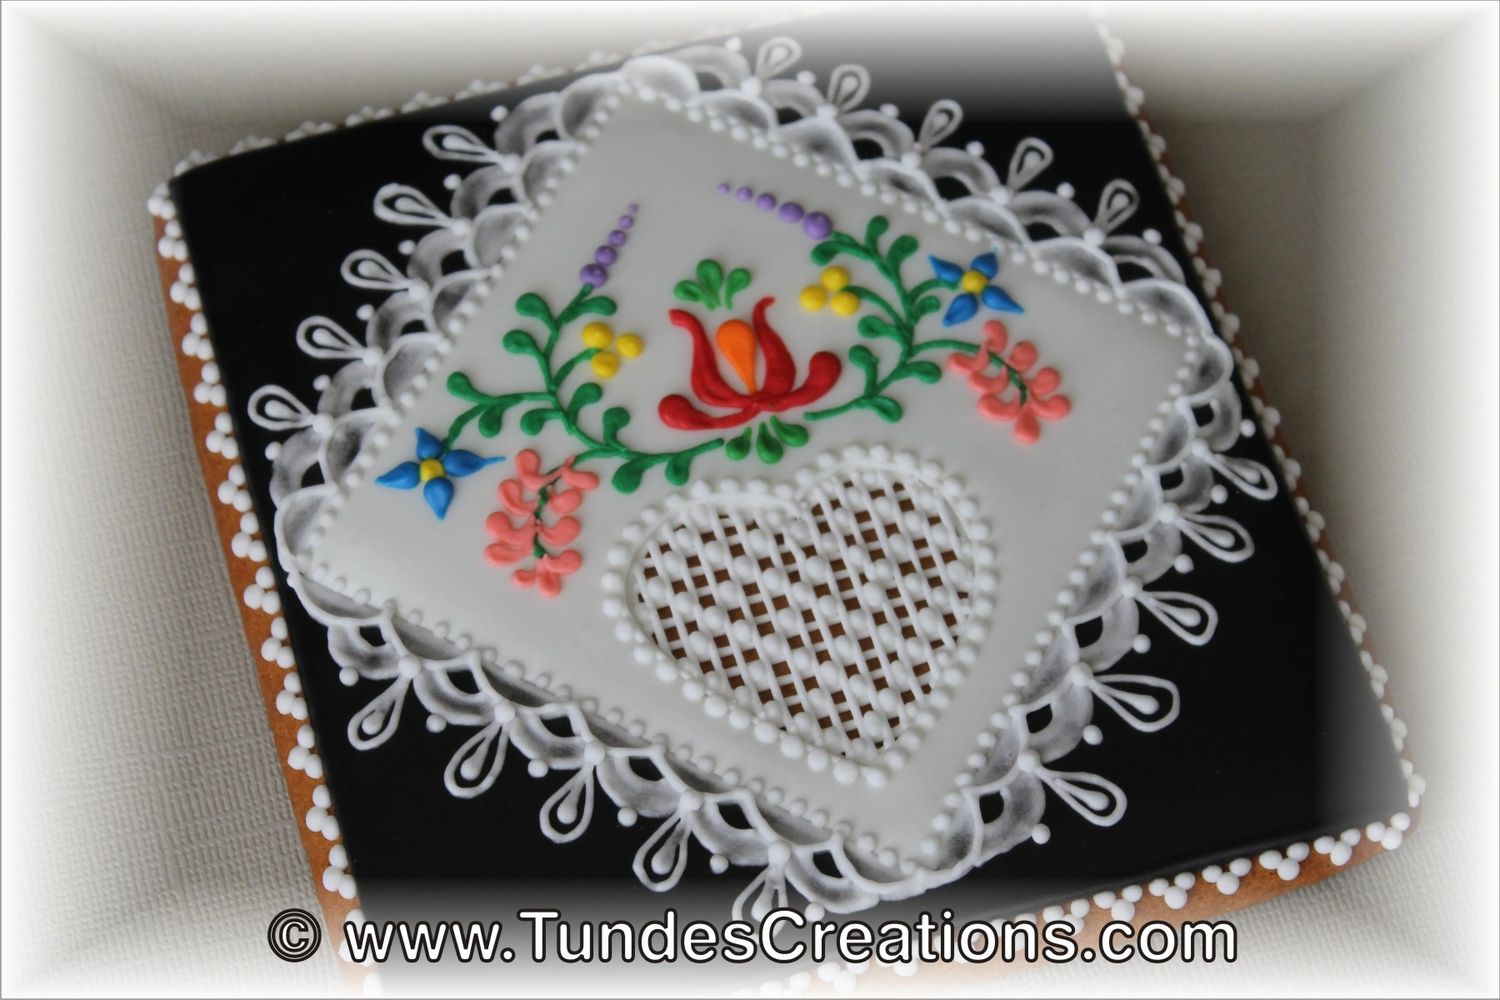 Honey gingerbread cookie with Hungarian folk art flowers.